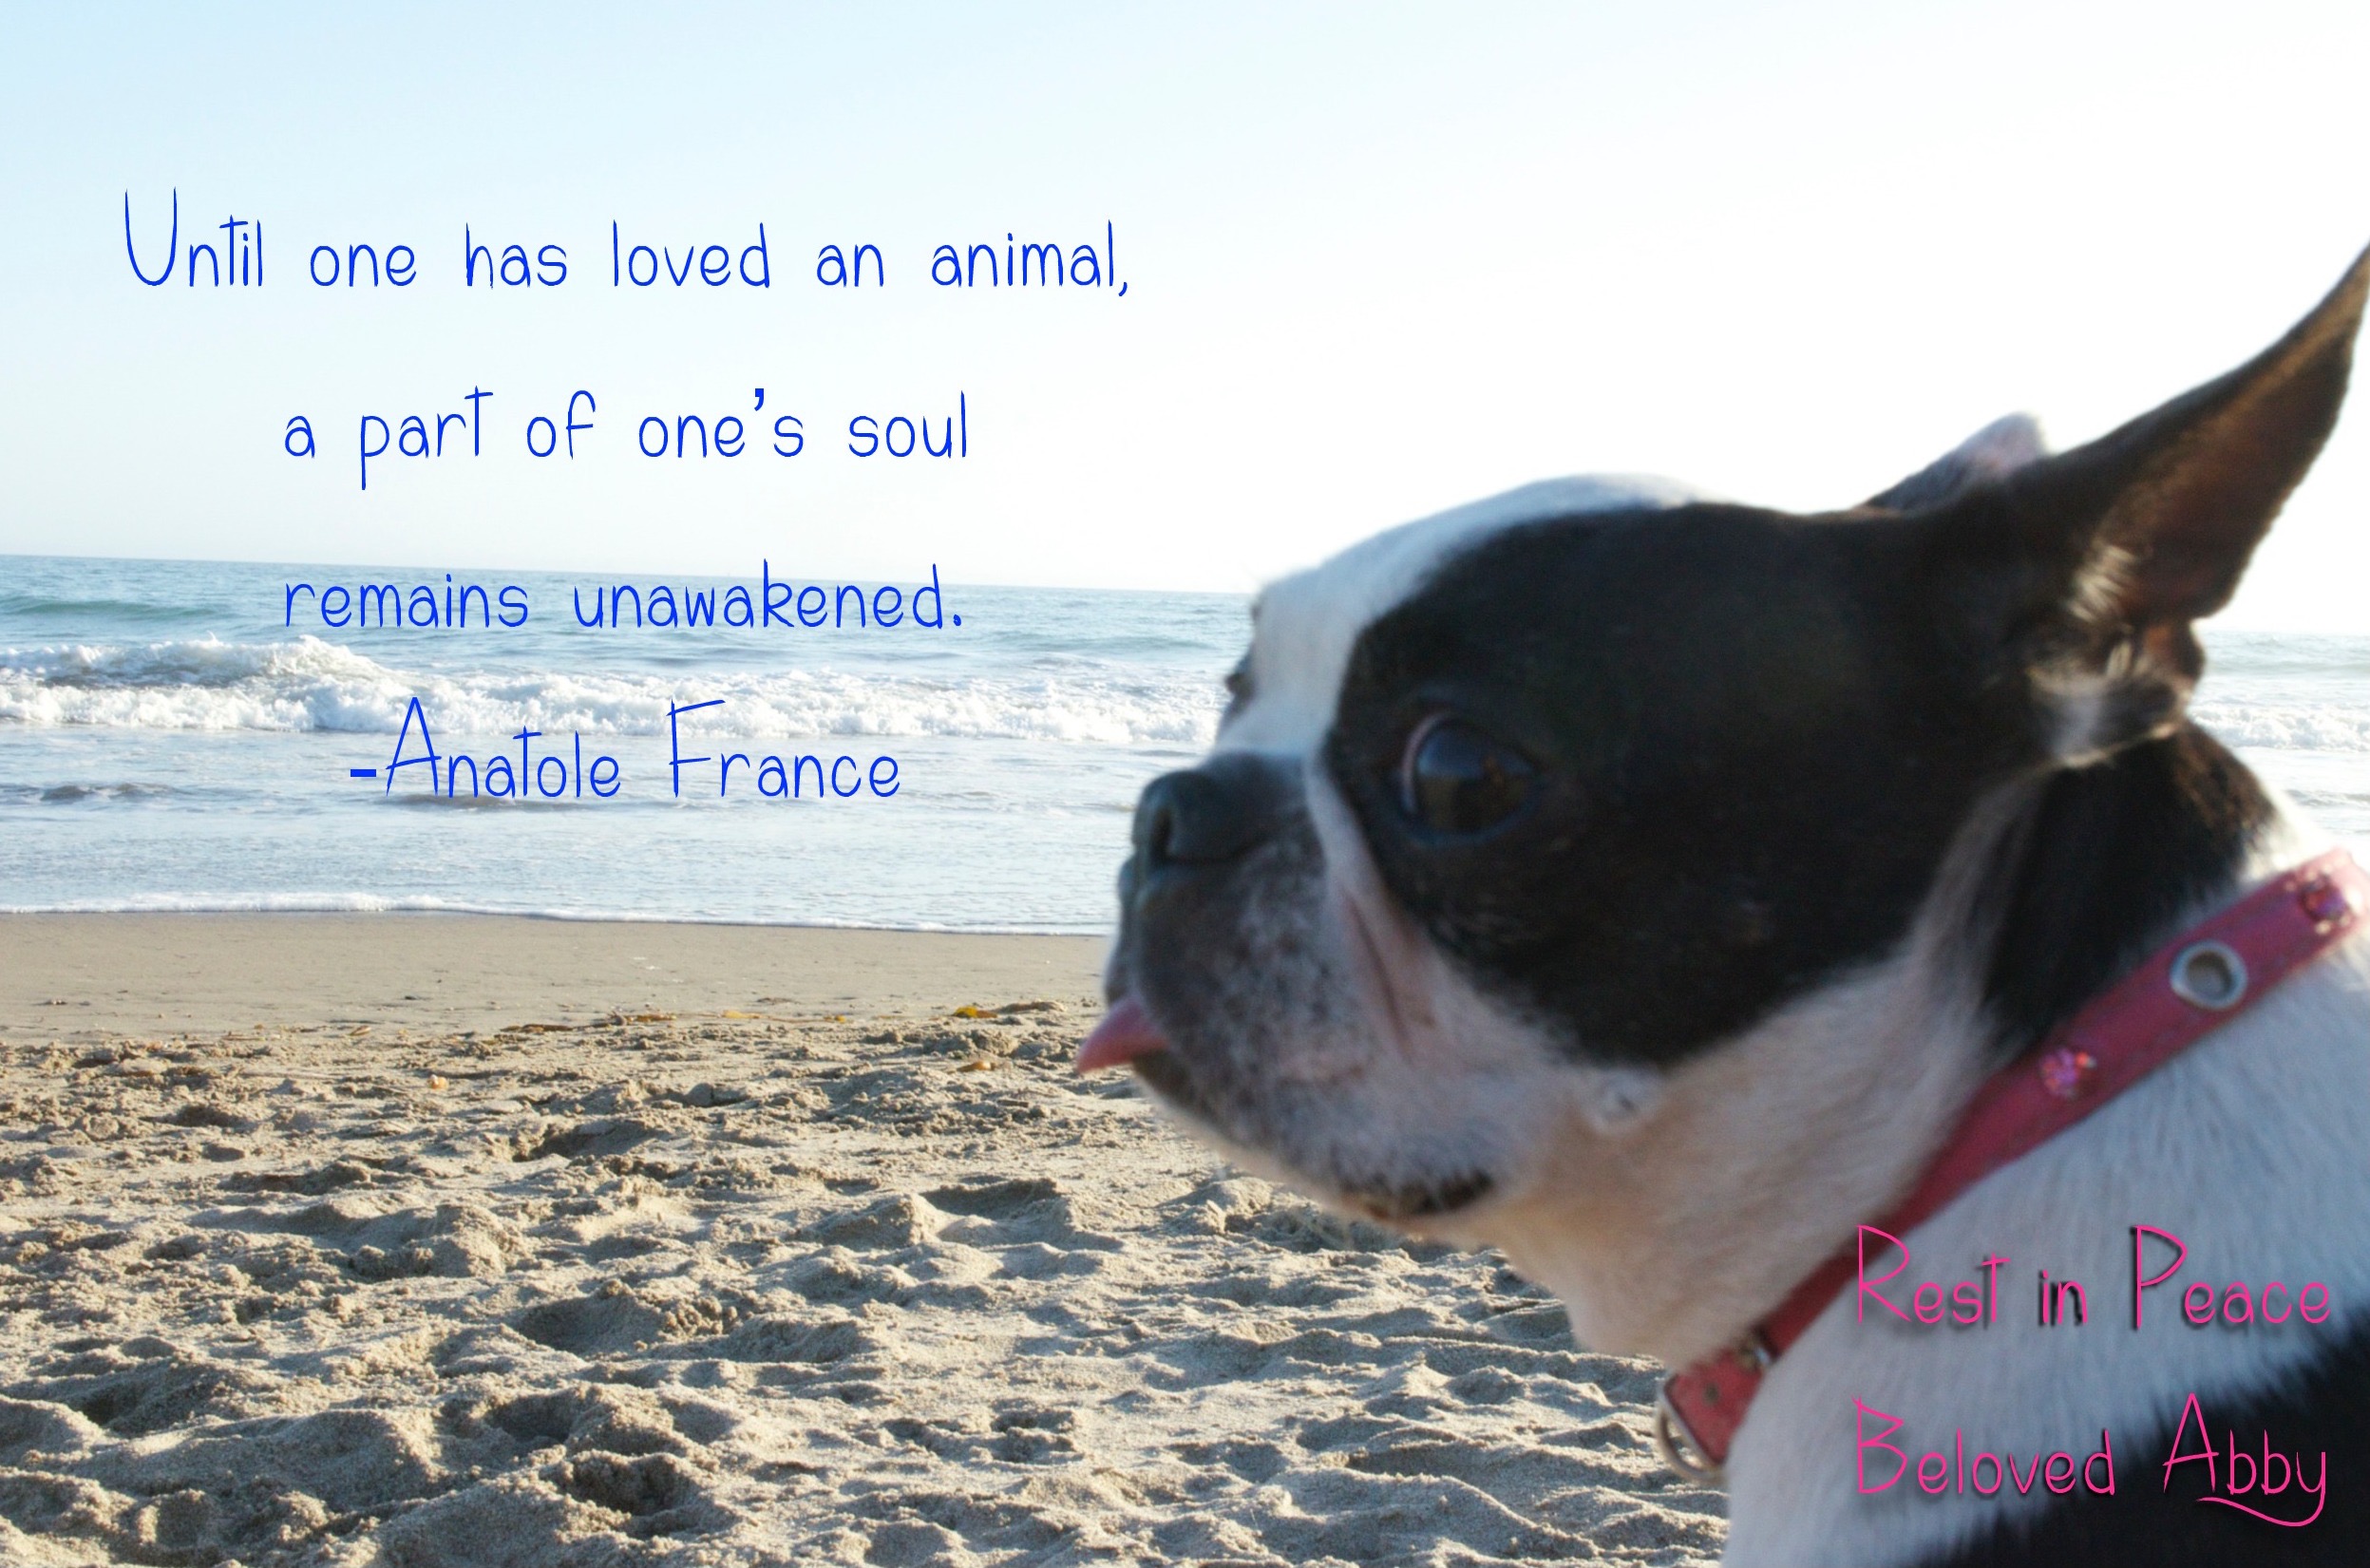 Abby RIP with Anatole France quote “Until one has loved an animal